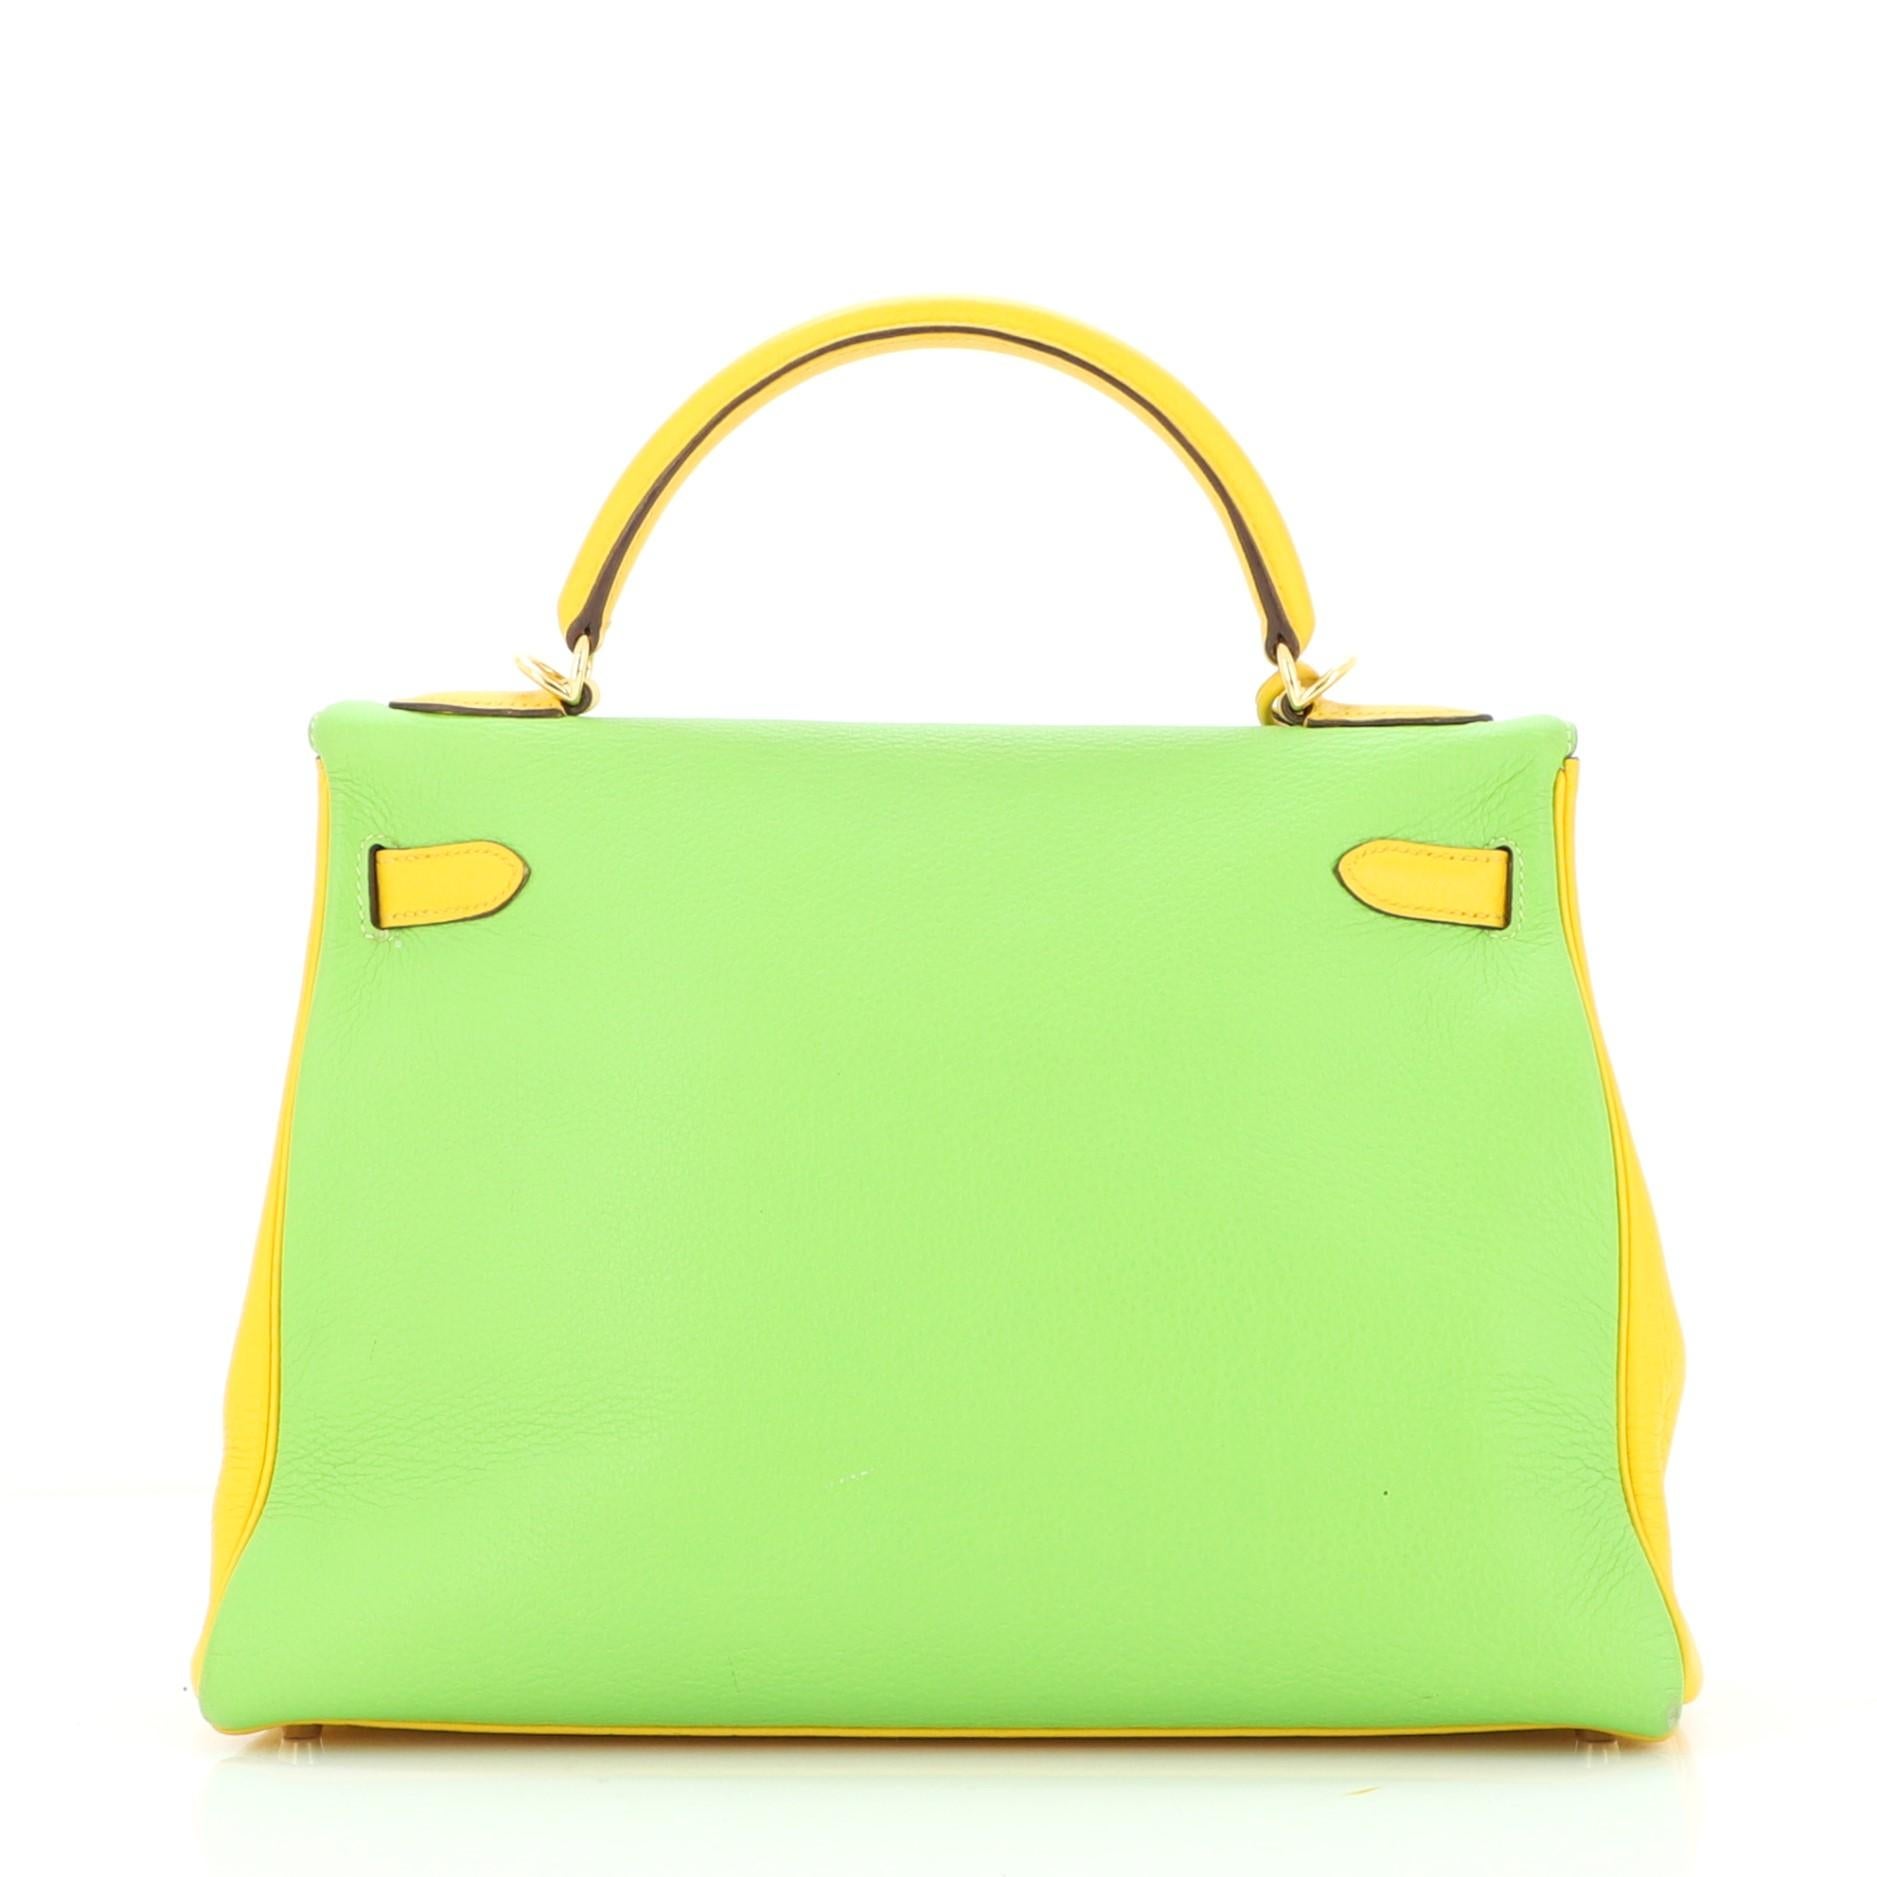 how much is a hermes kelly bag